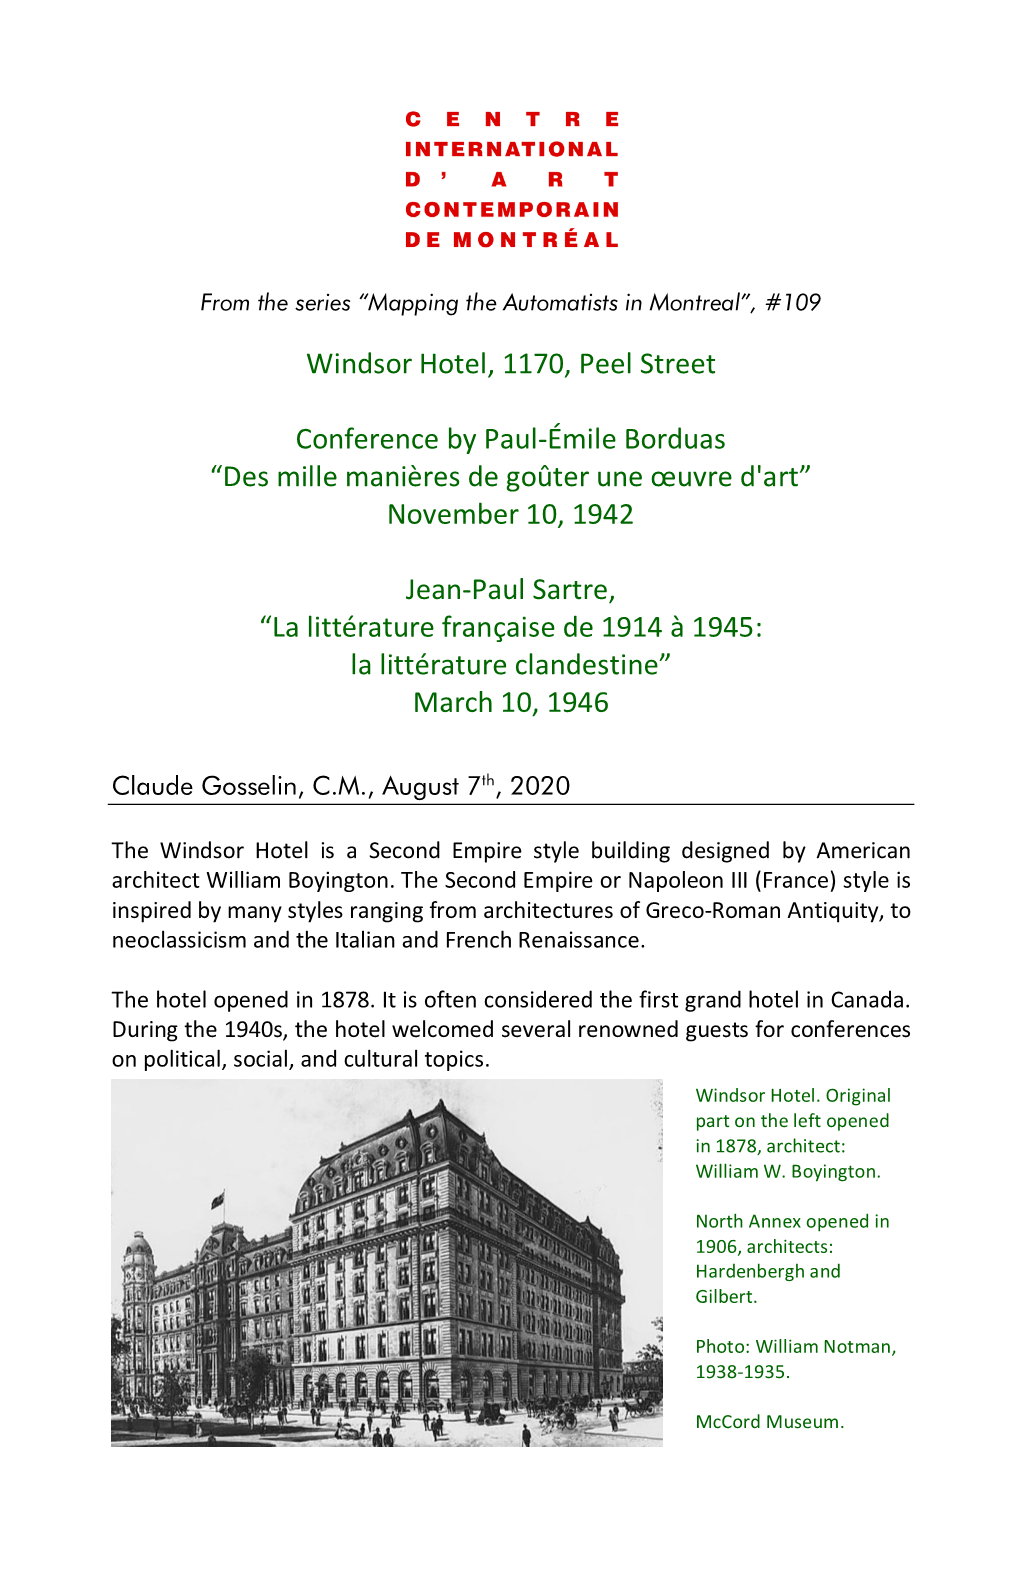 Windsor Hotel, 1170, Peel Street Guilbault to Perform the Play in Paris, but She Declined the Invitation